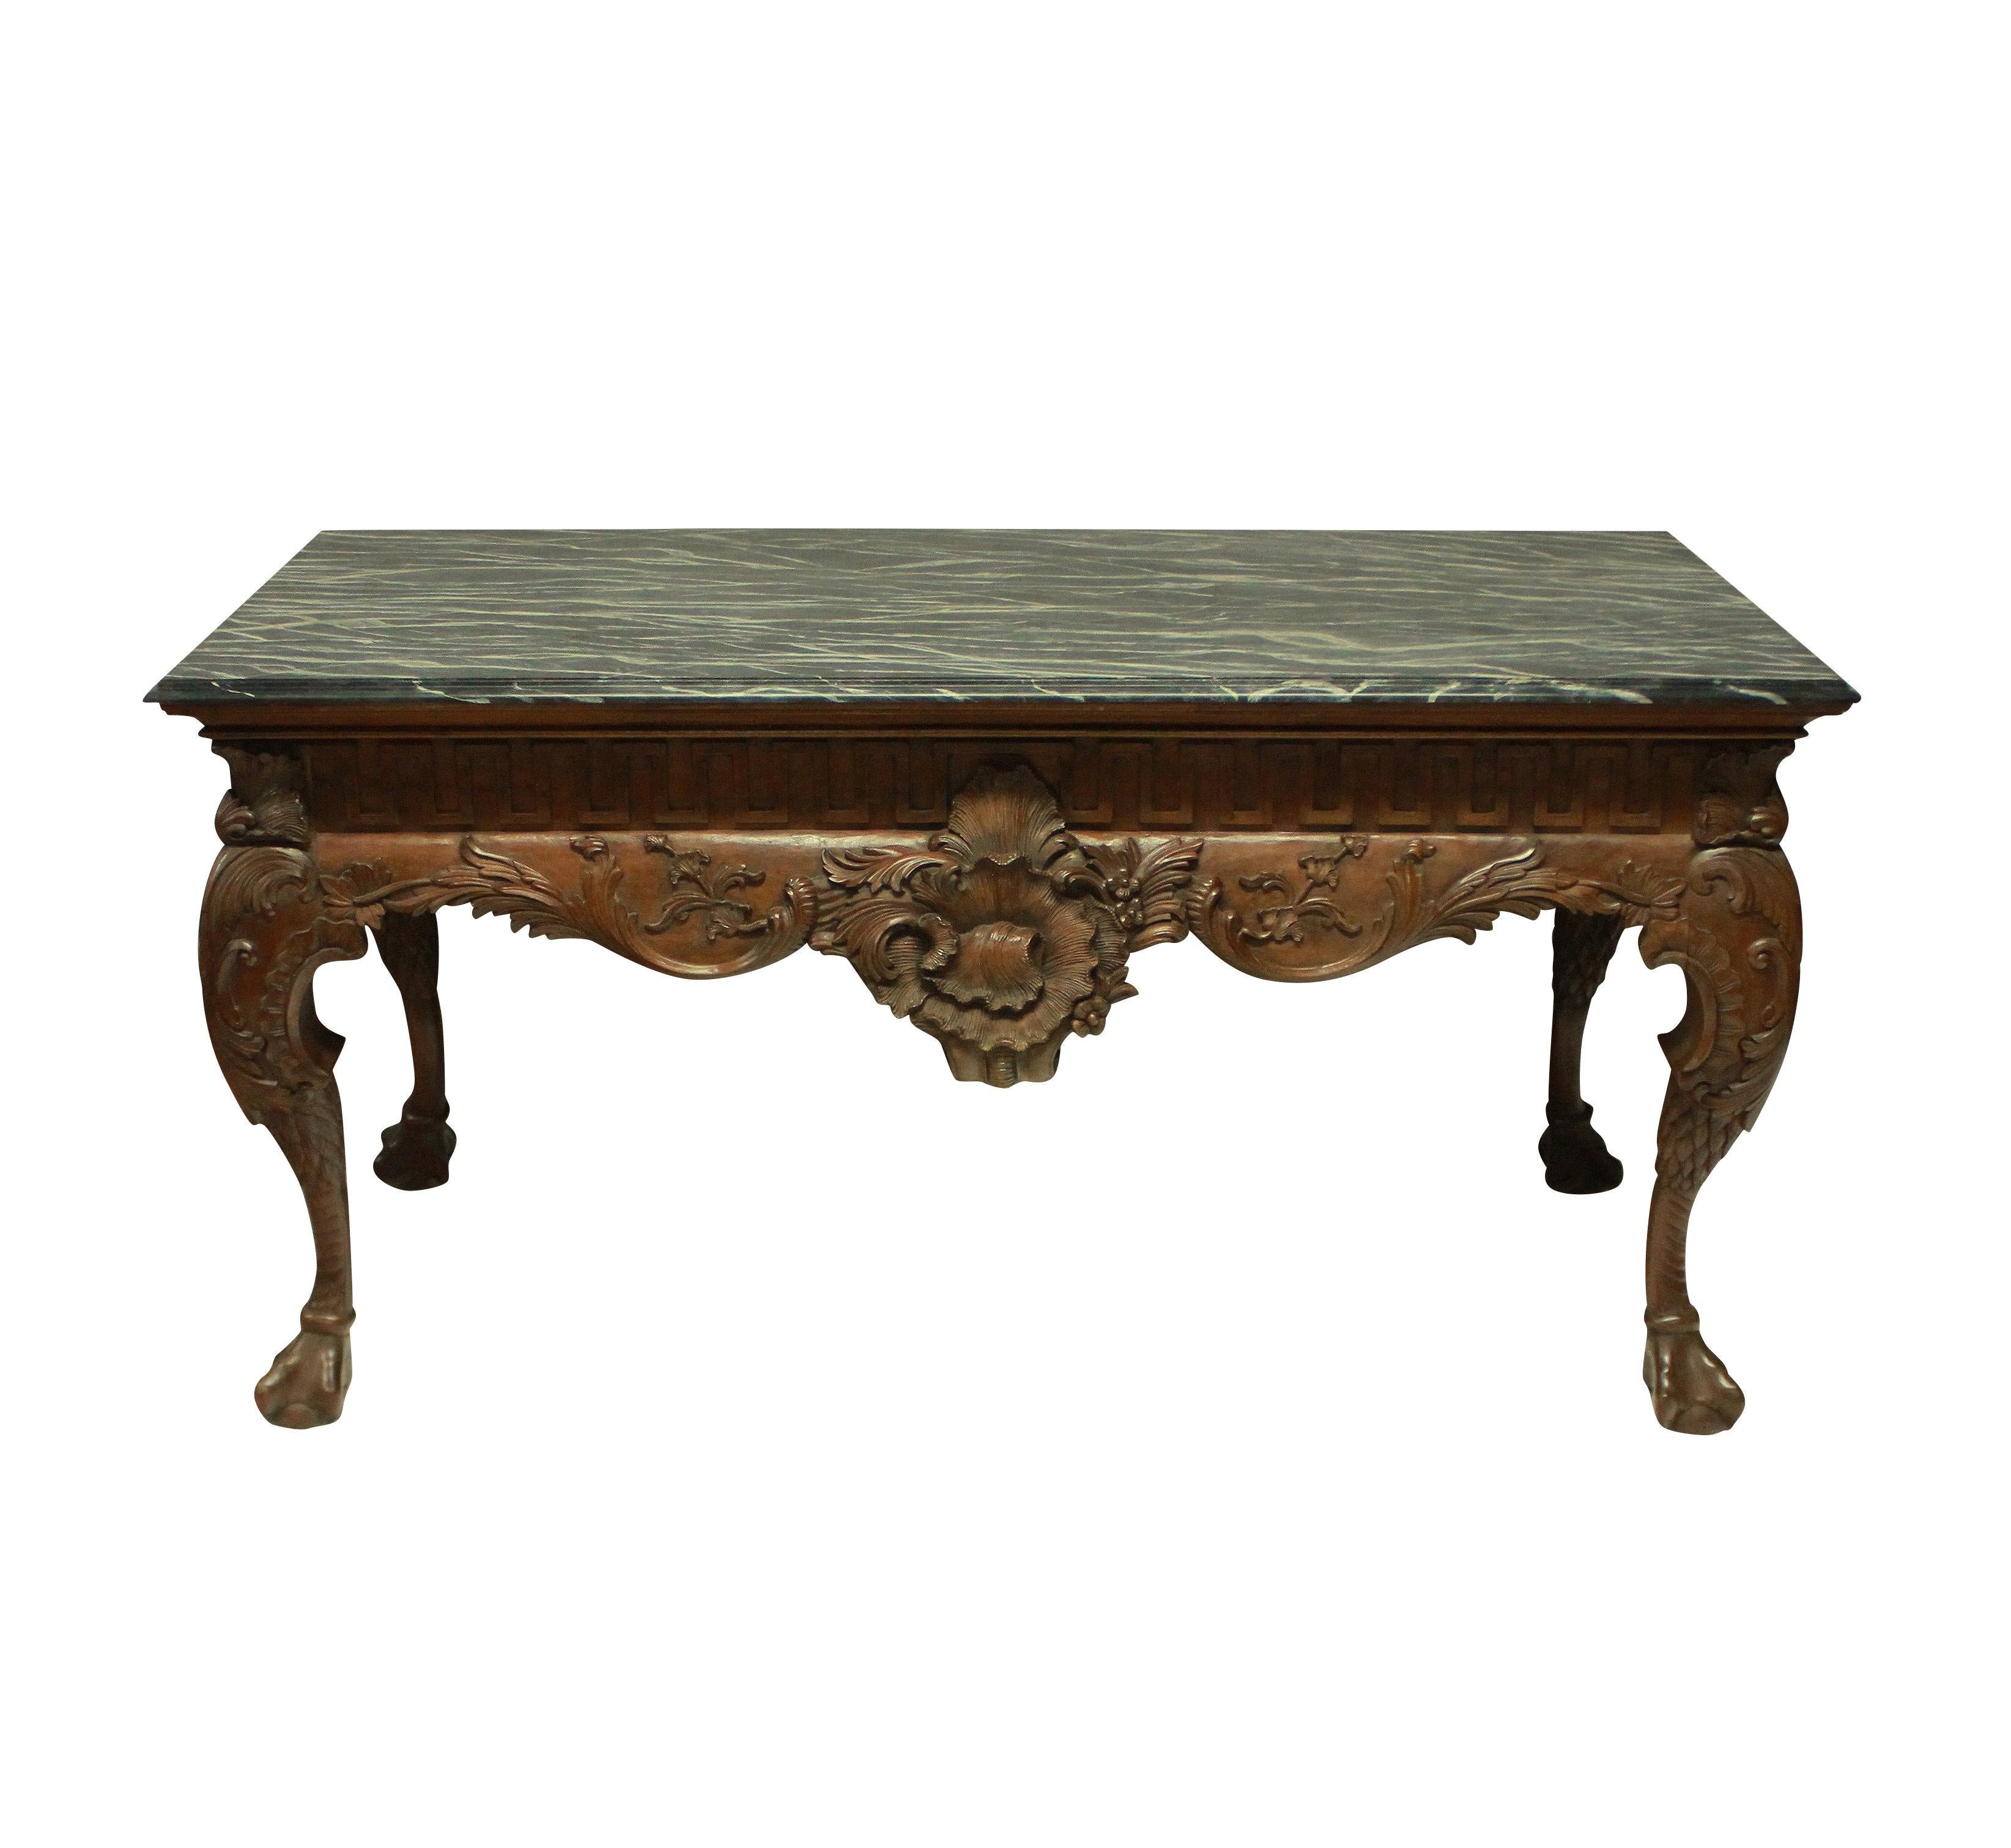 A large and beautifully carved George II style mahogany centre table, with Greek key frieze and a faux marble top. It is carved on all four sides, so could be used as a console or centre table. The table has a good patina throughout.
 